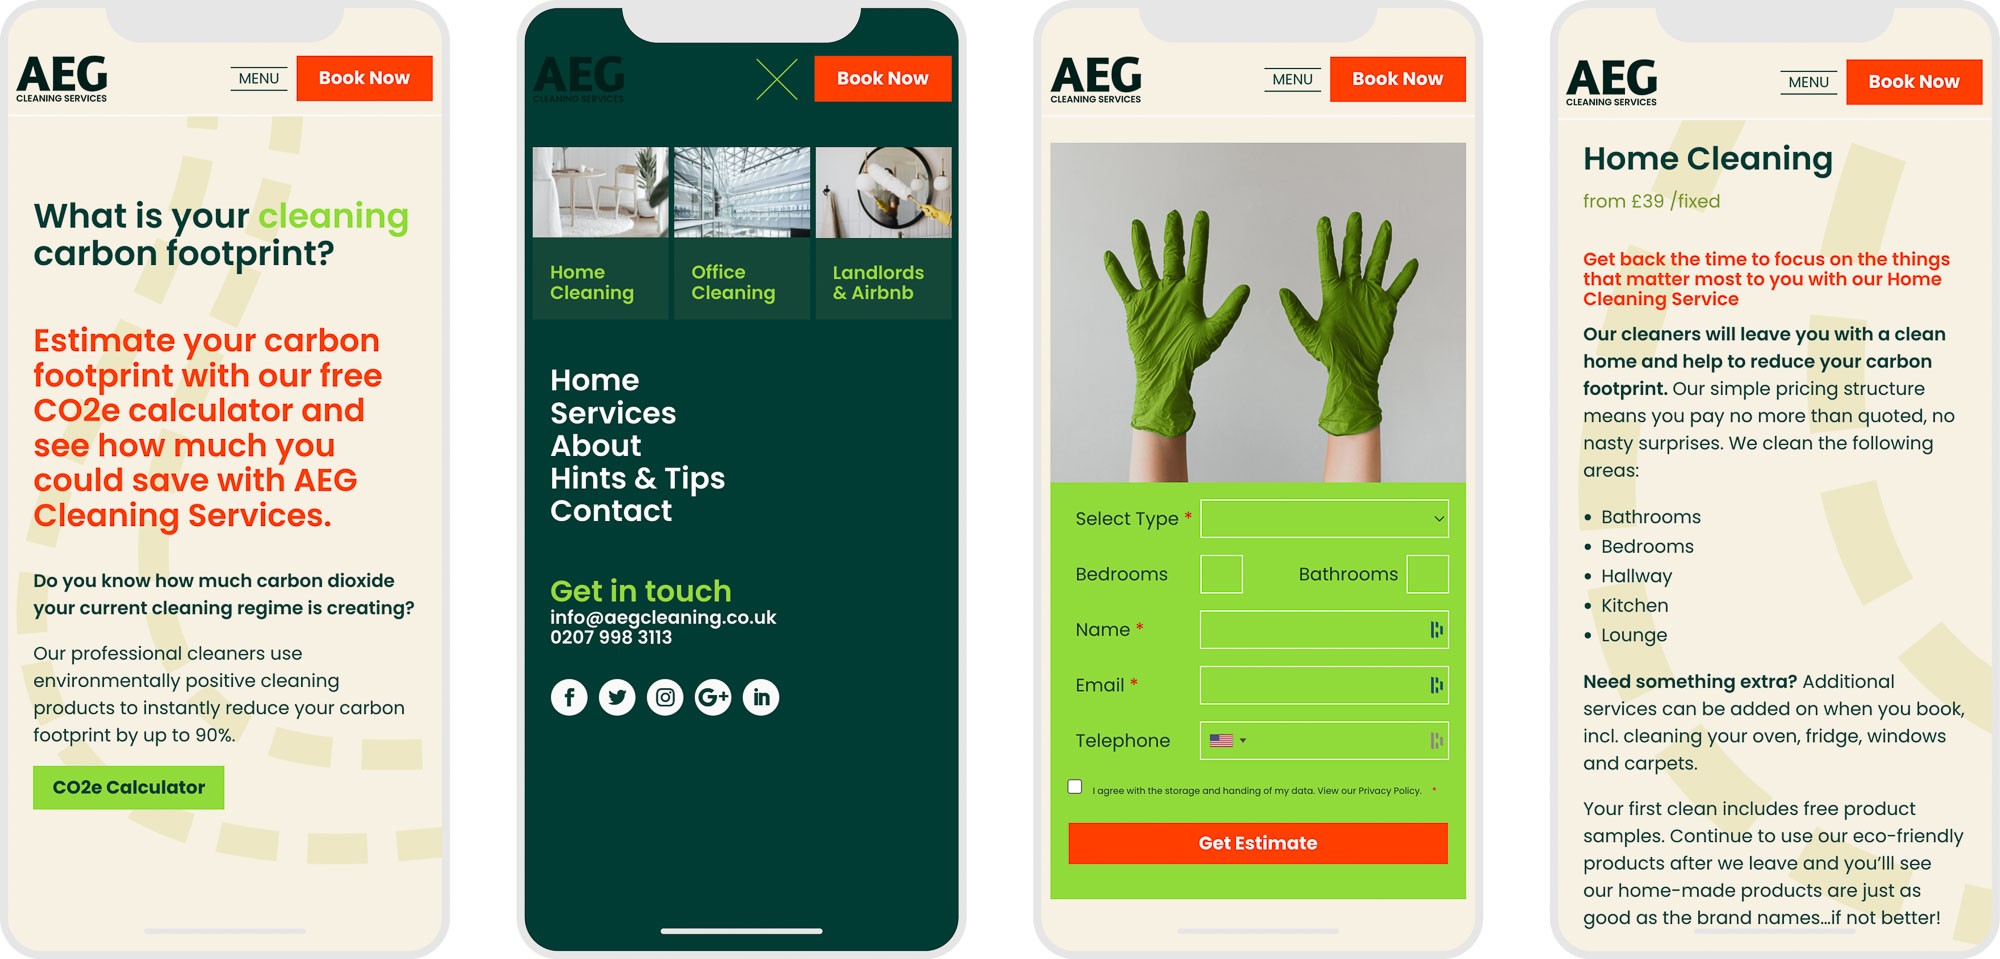 AEG Cleaning Services